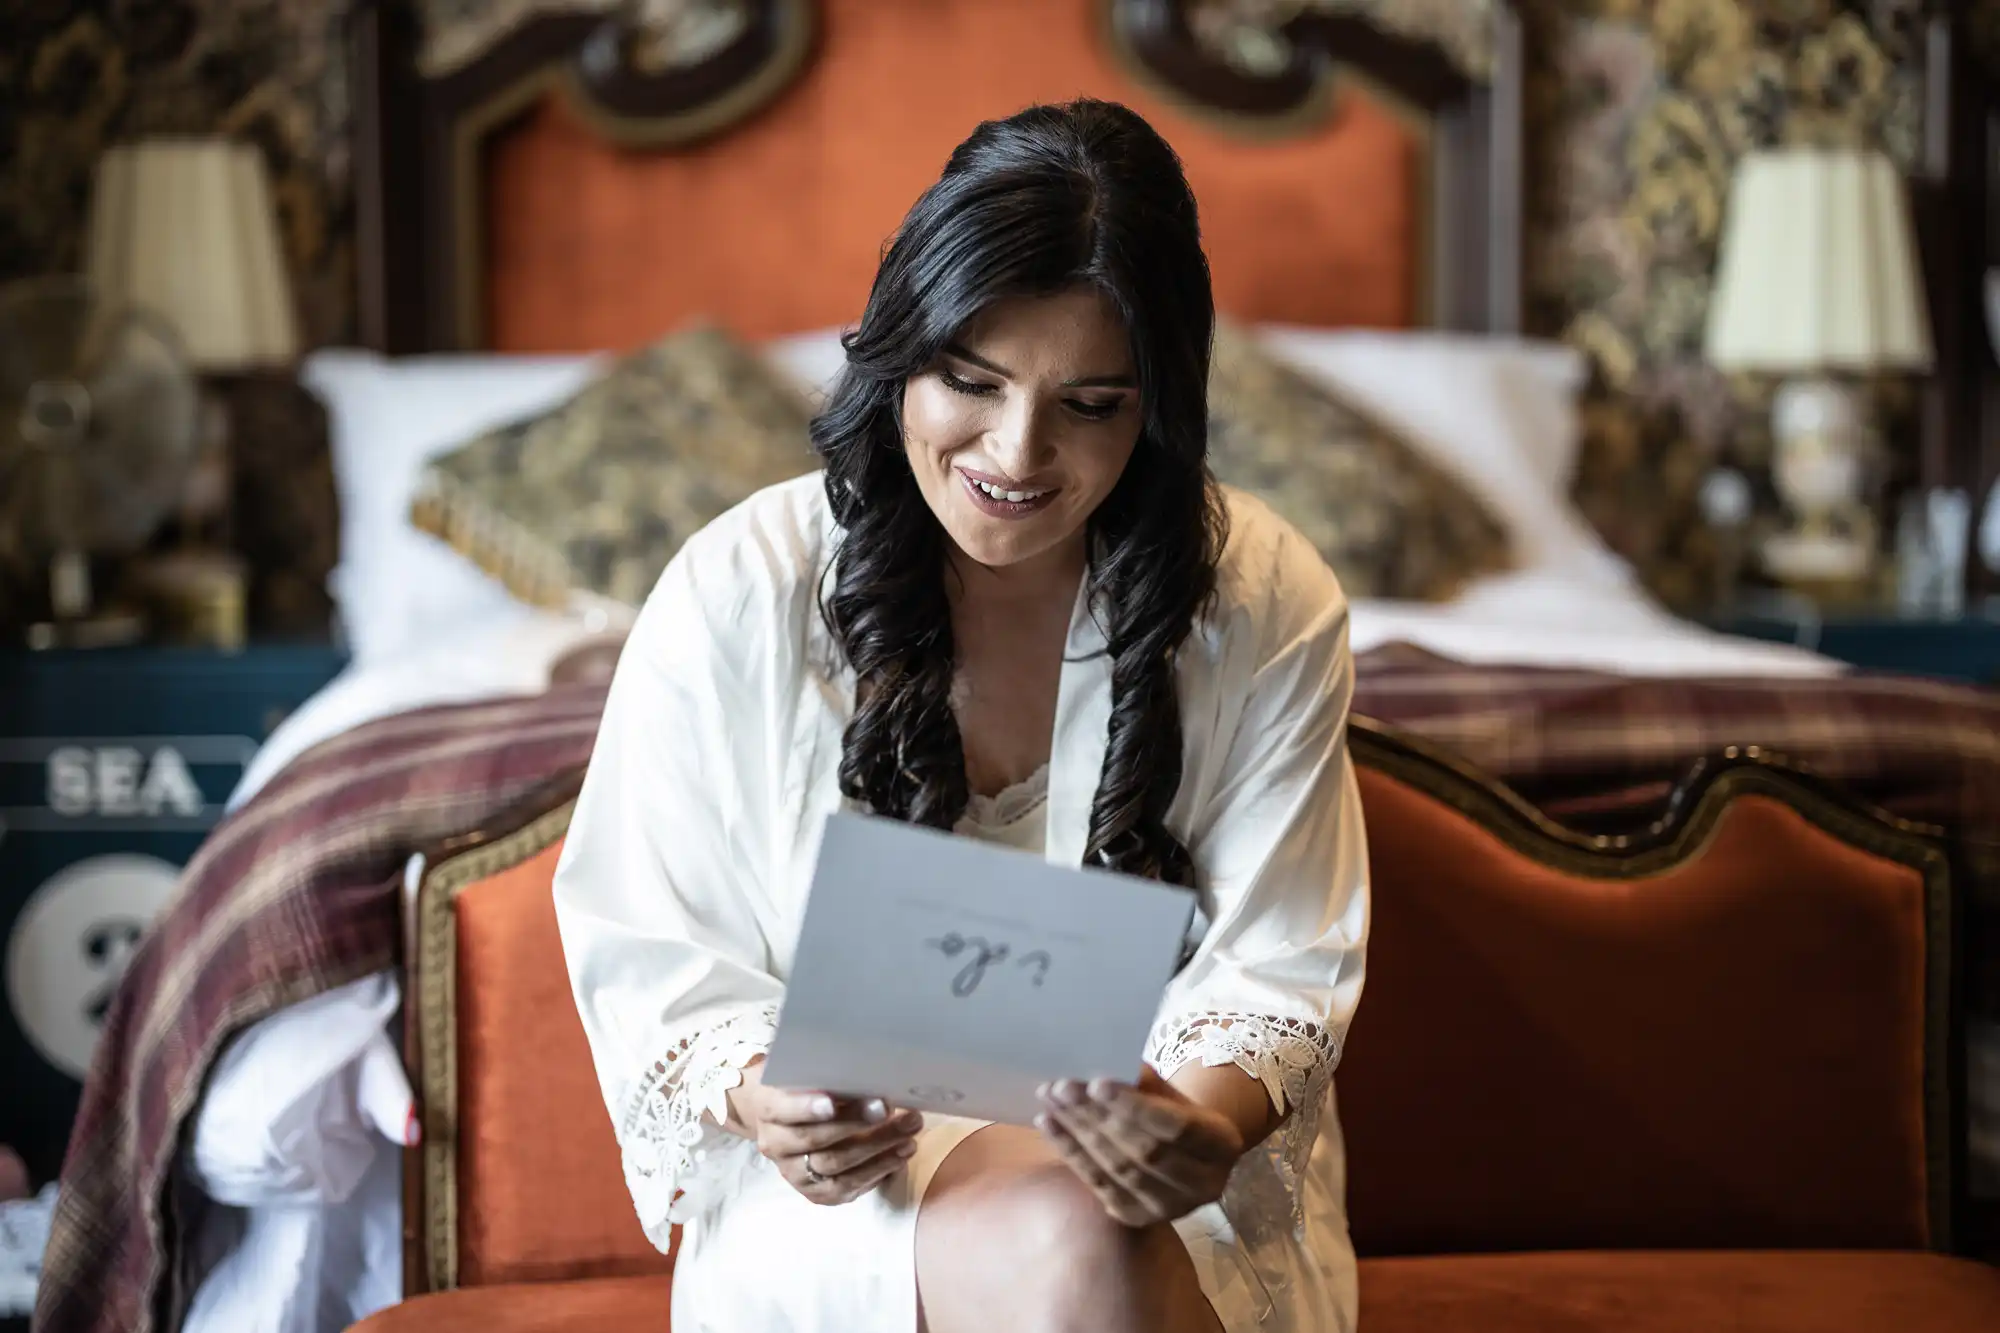 A woman in a white robe sitting on a red couch in an ornately decorated room, smiling as she reads a letter.